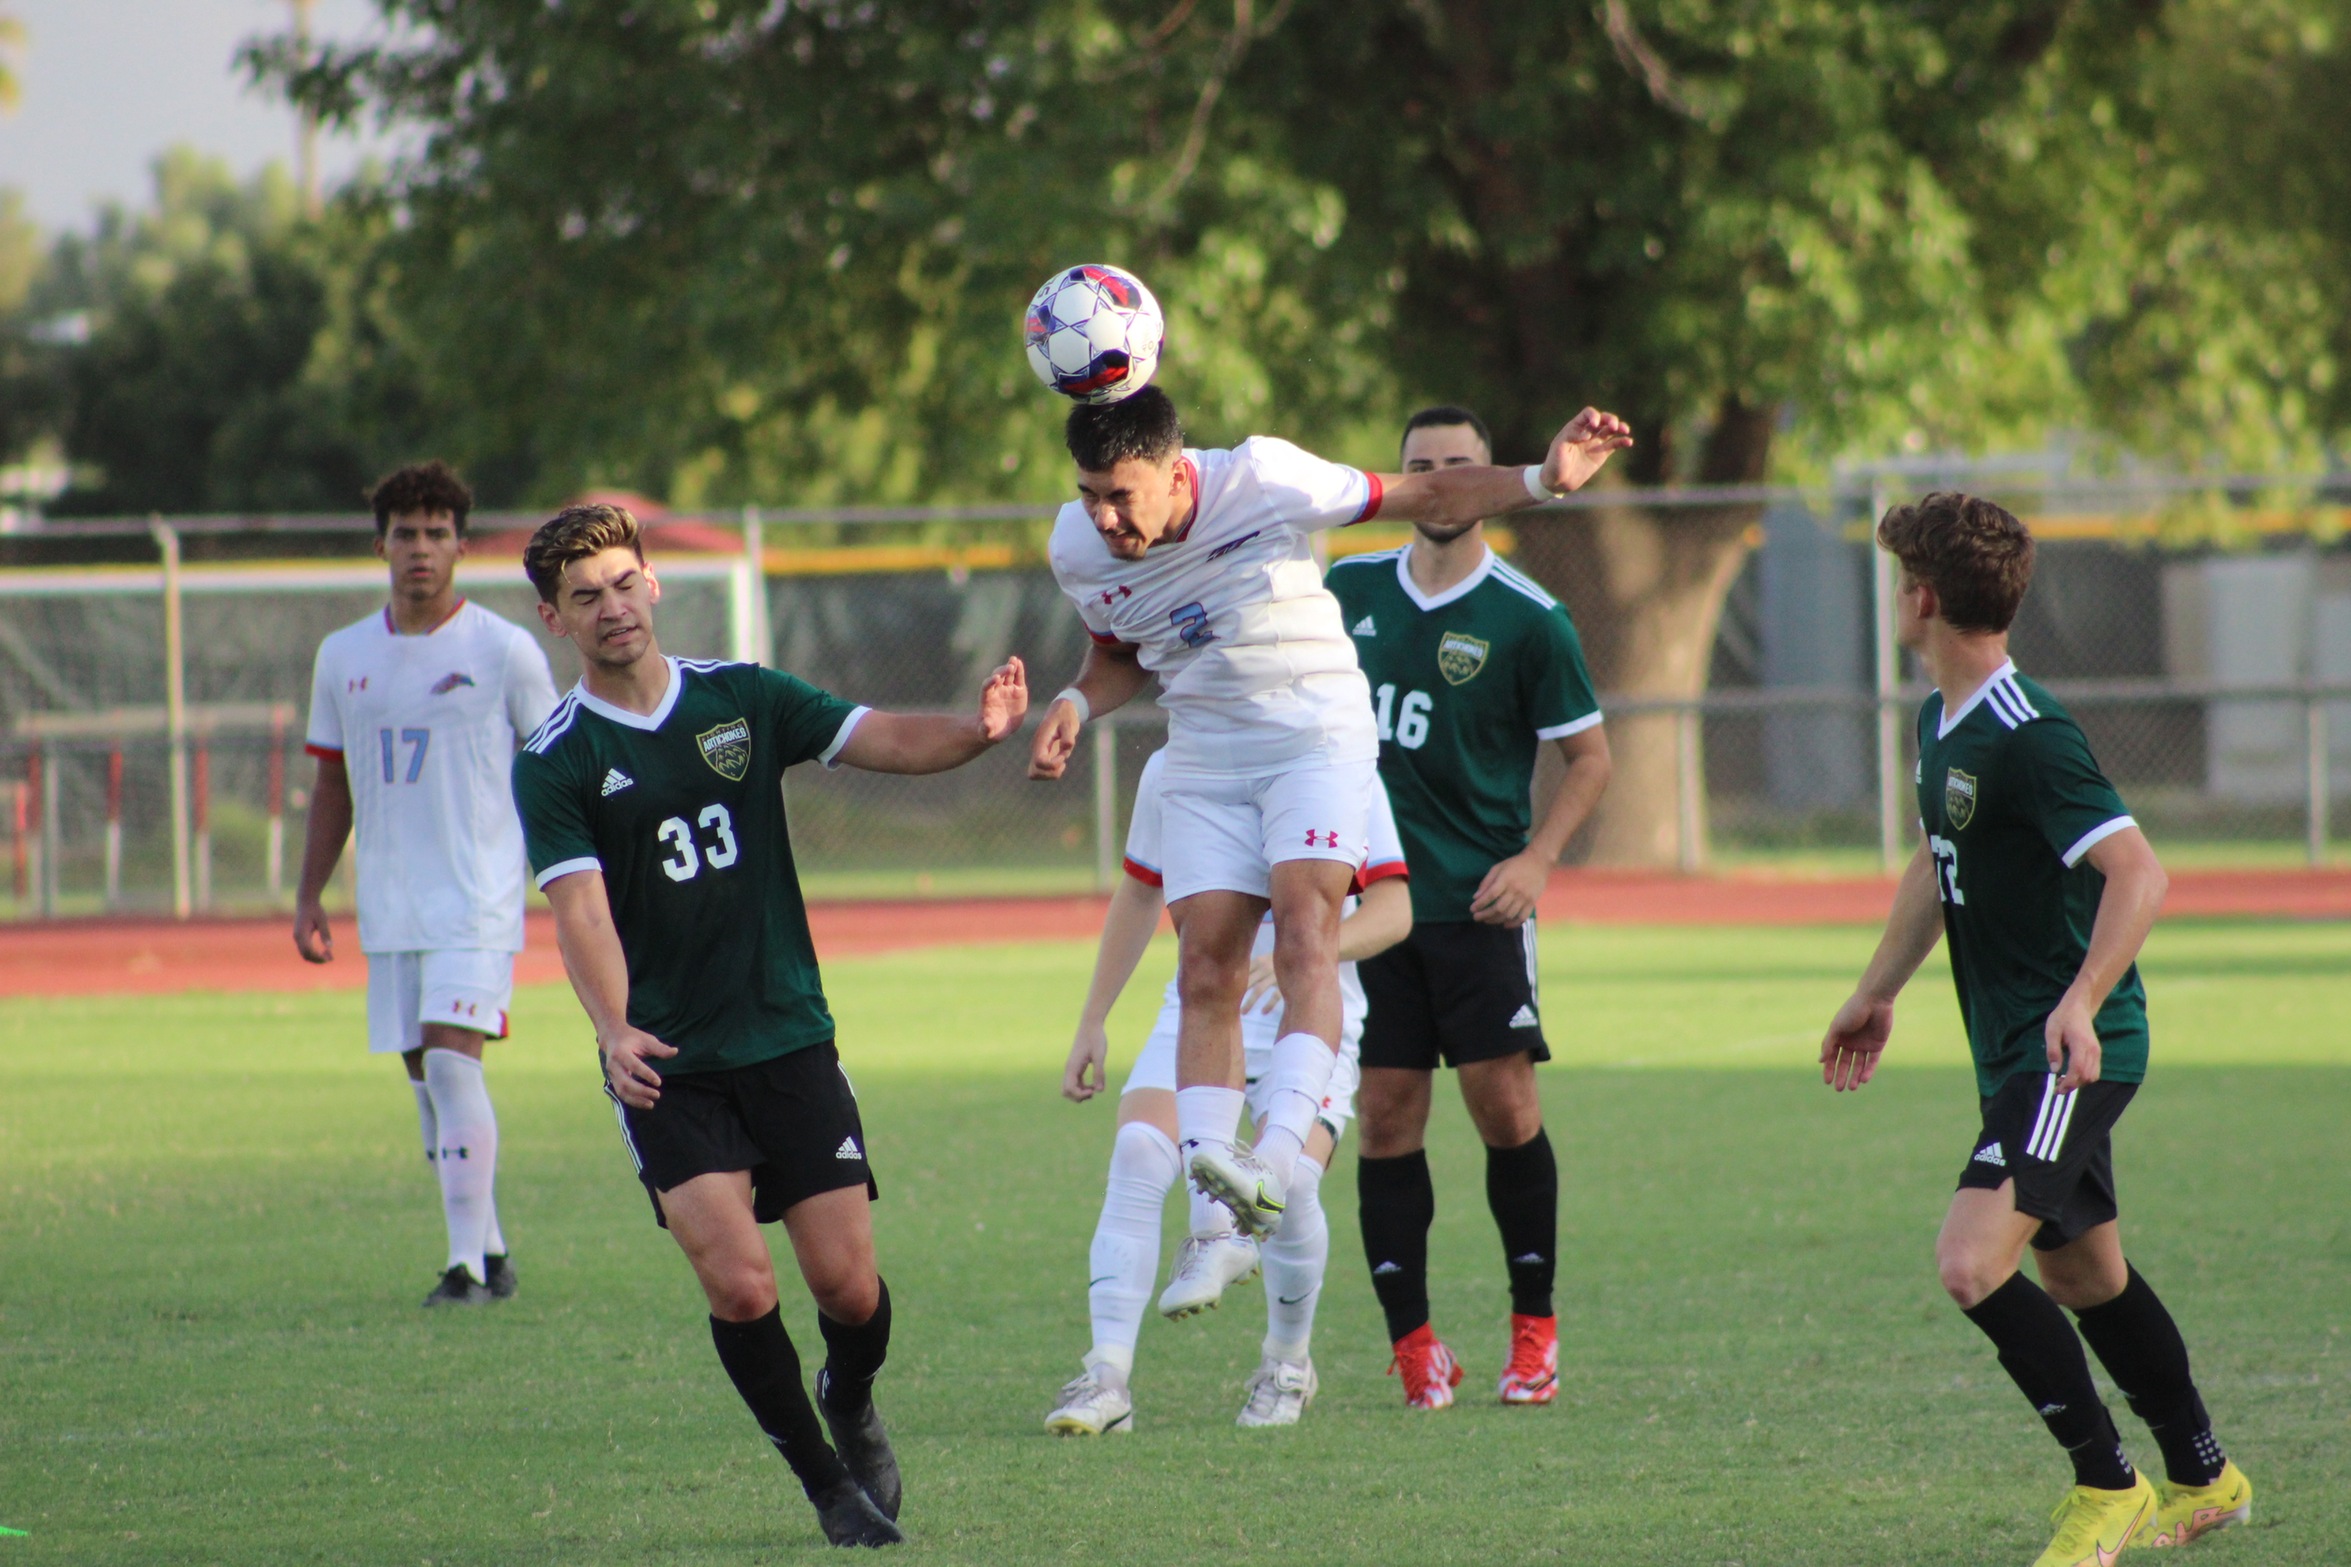 Mesa hosts Gateway as they look to help their playoff seeding